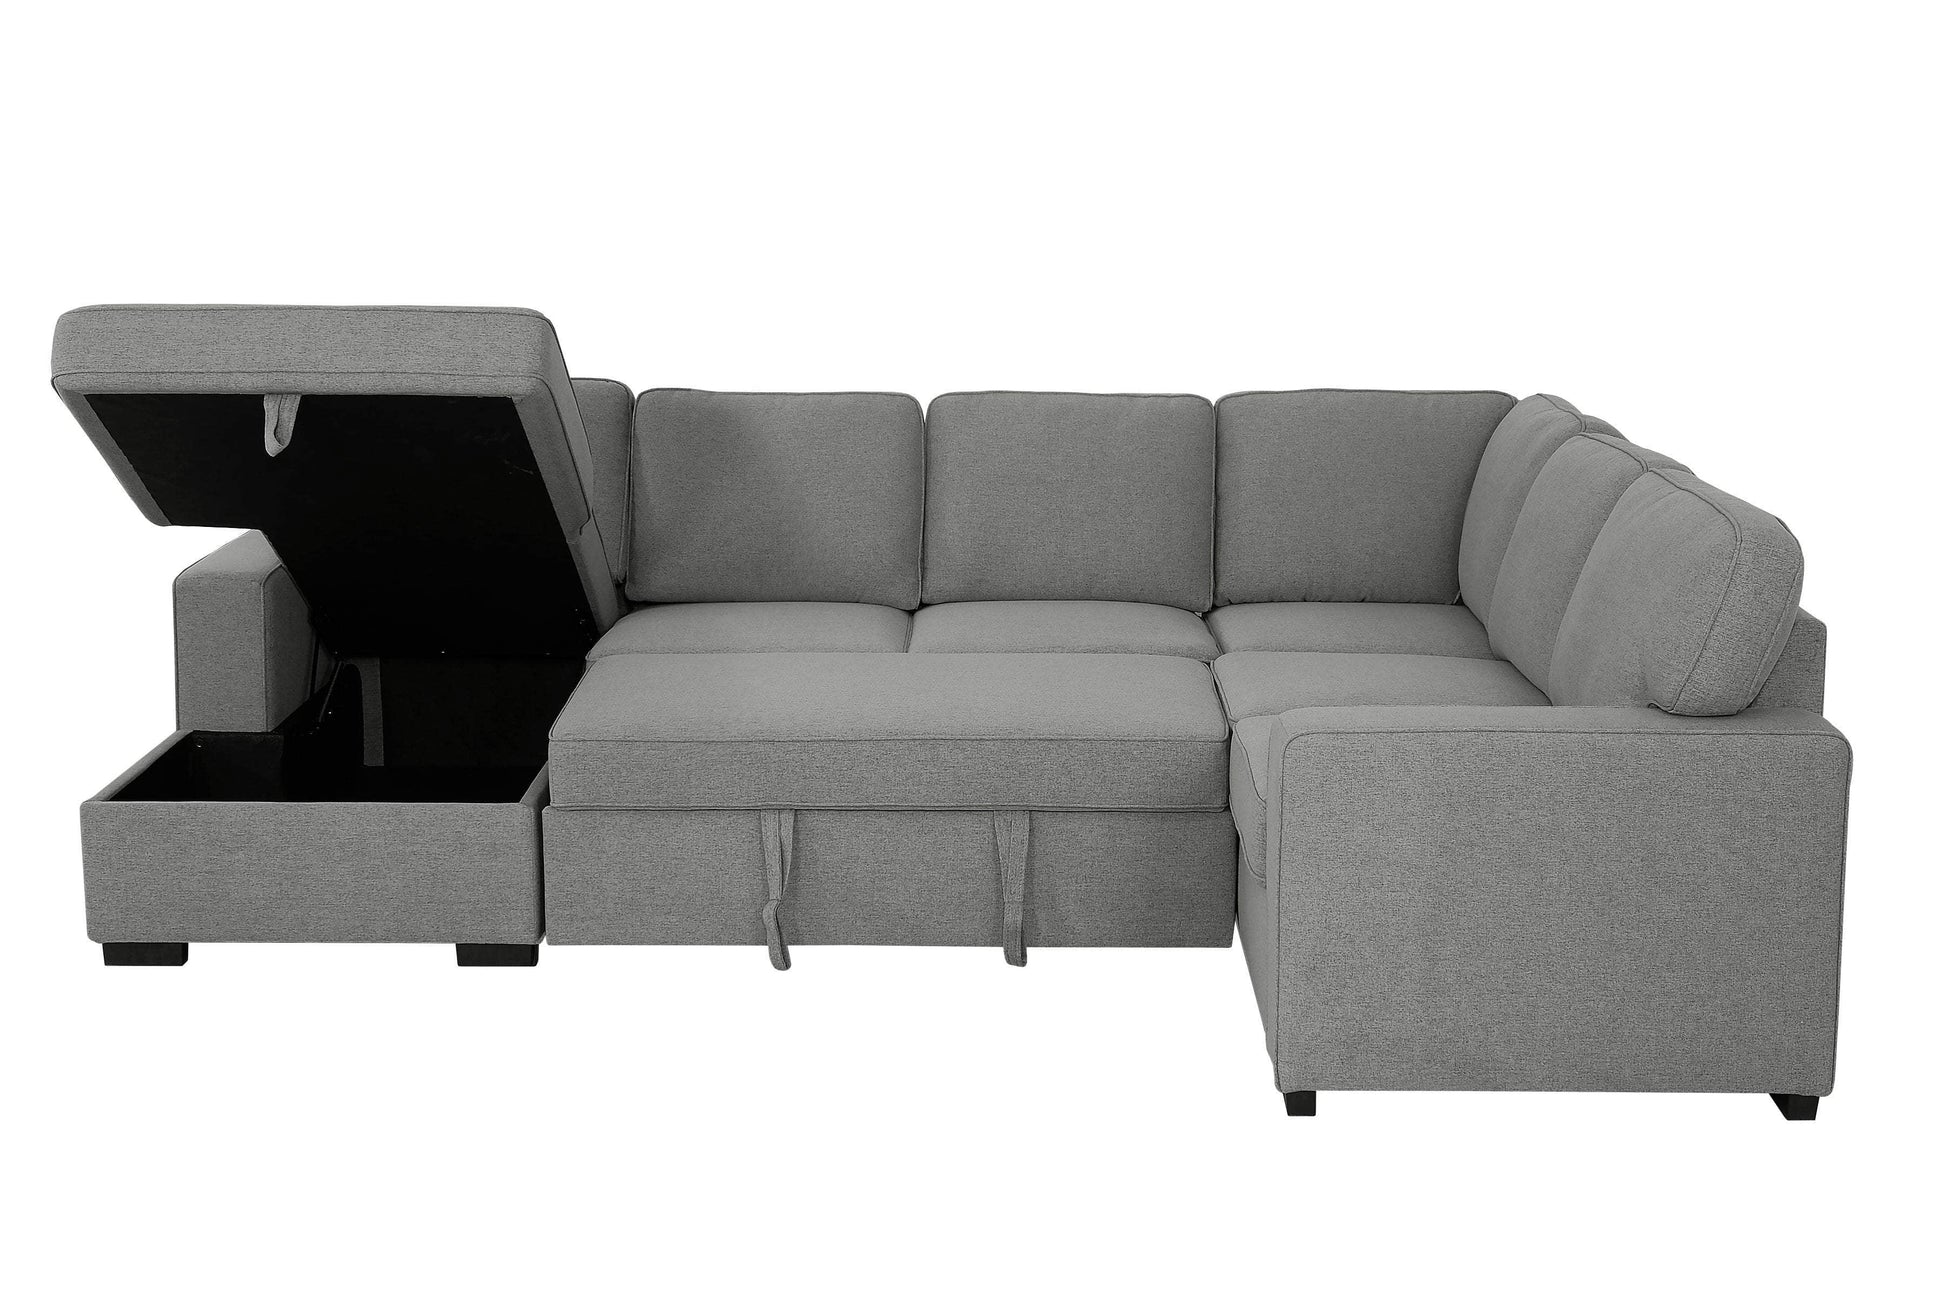 Urban Cali Sectional Left Facing Chaise Santa Cruz Large Sleeper Sectional Sofa Bed with Storage Chaise